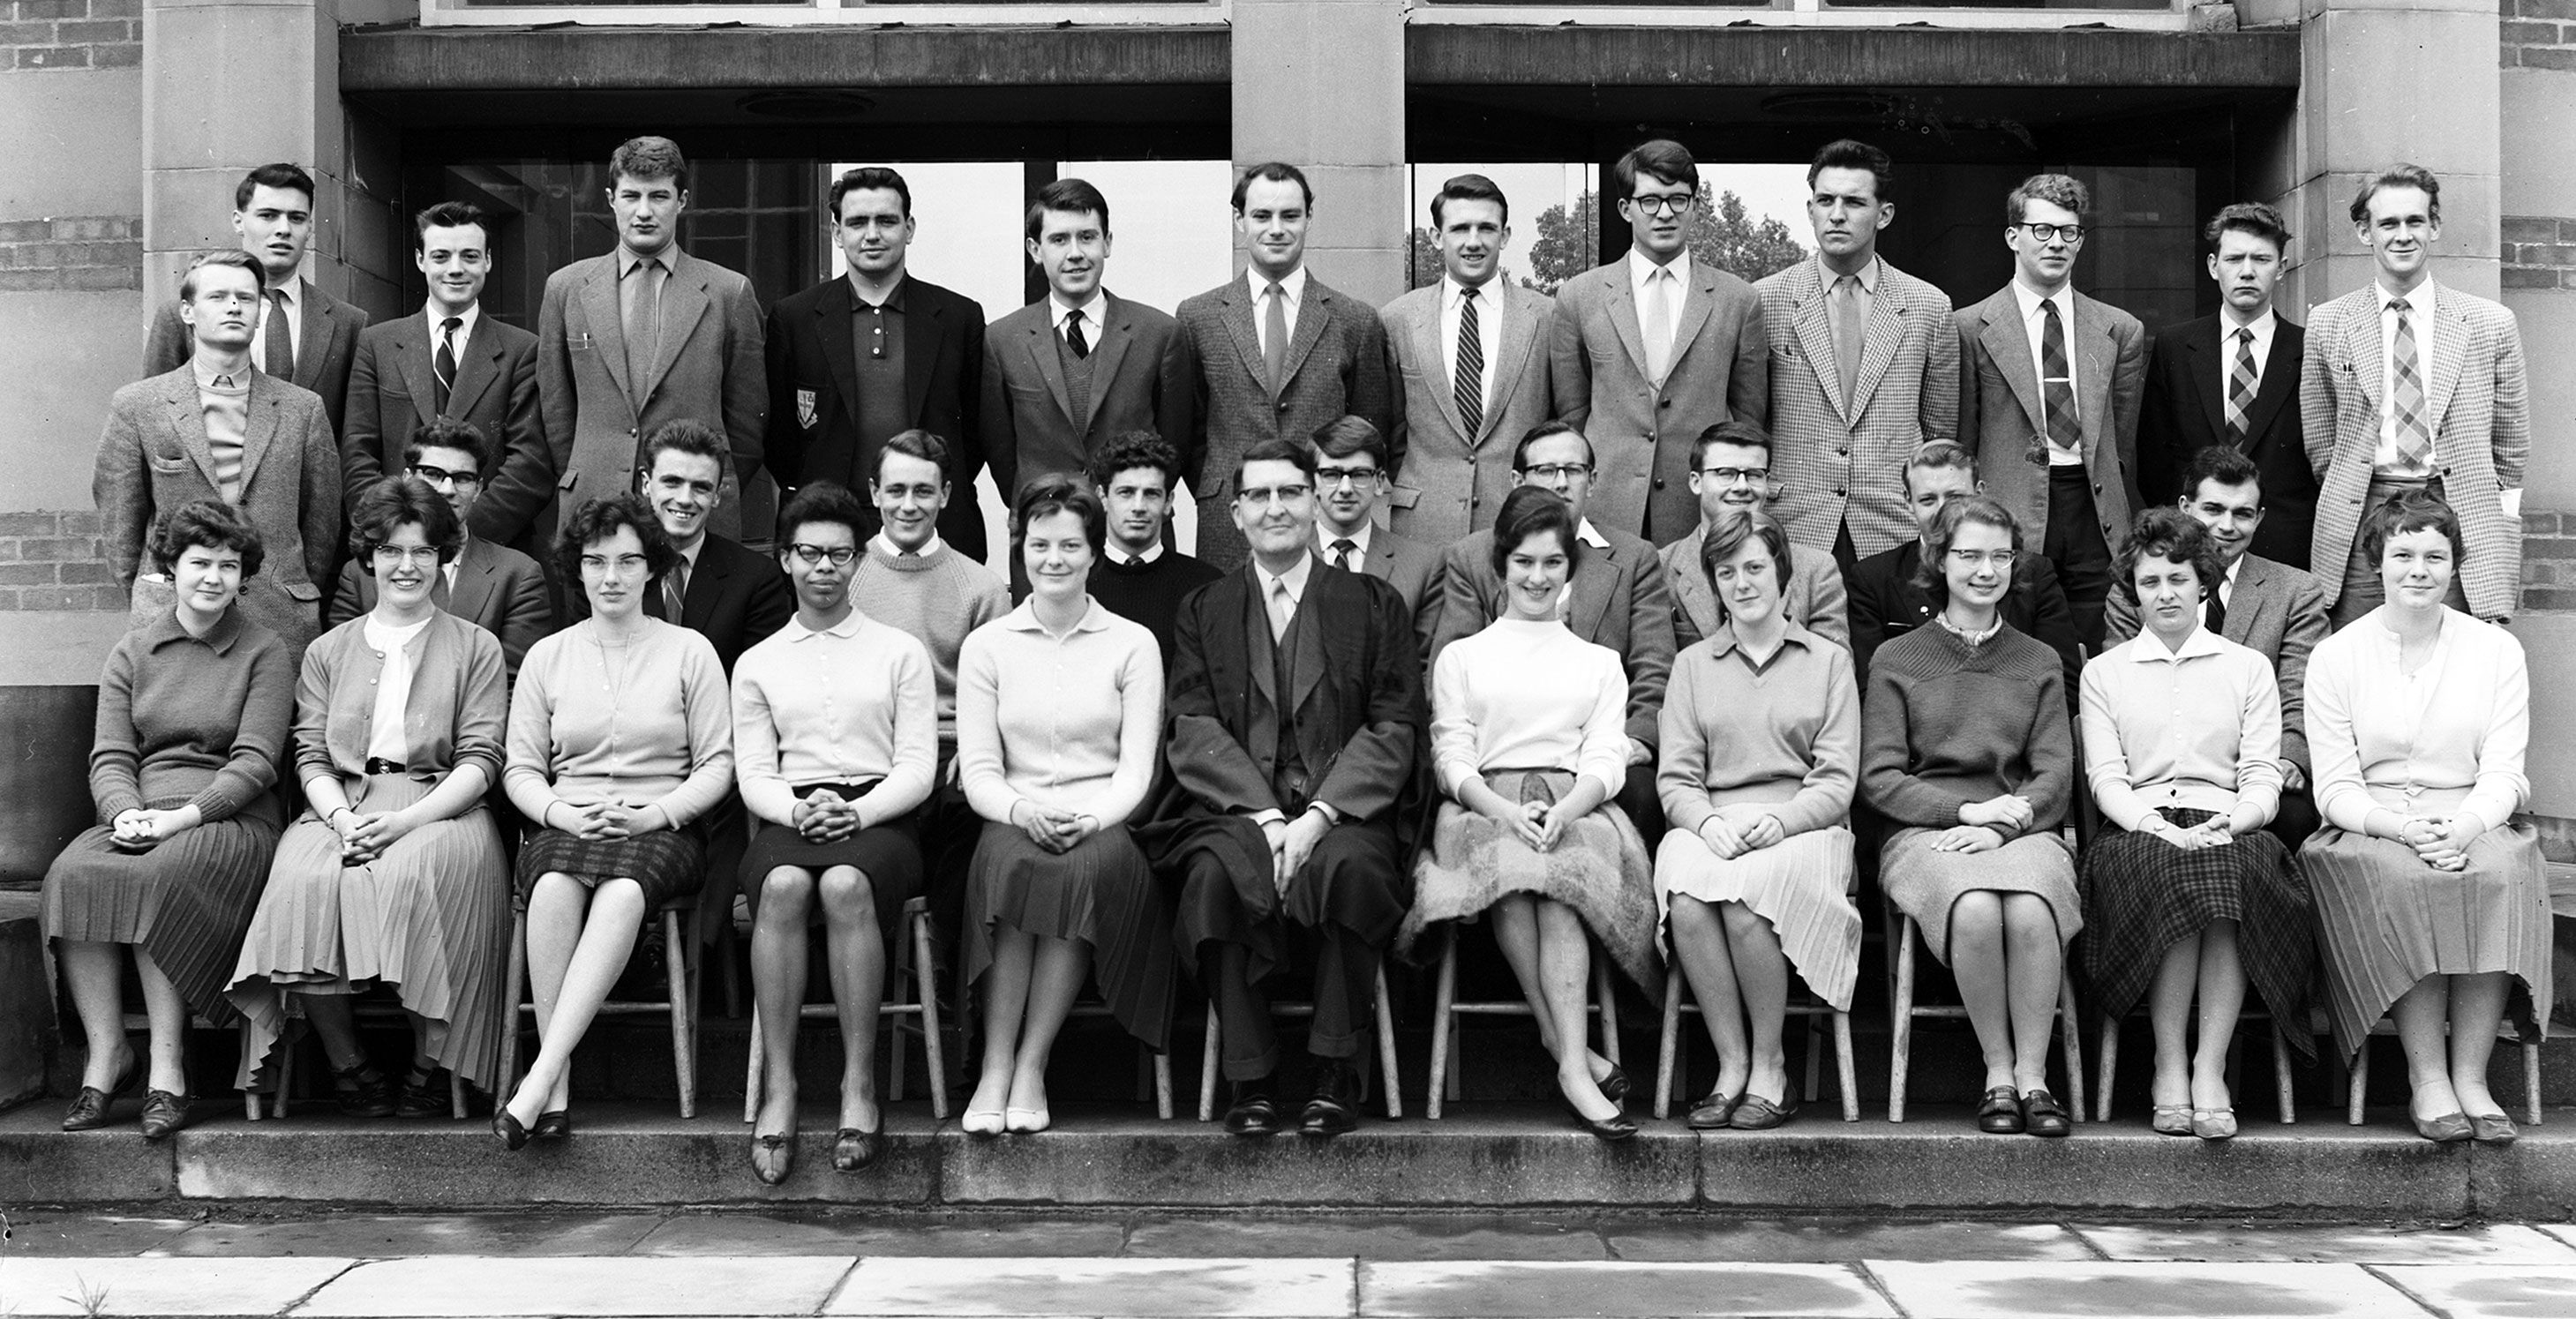 Geography Department Undergraduate Group photo from 1961